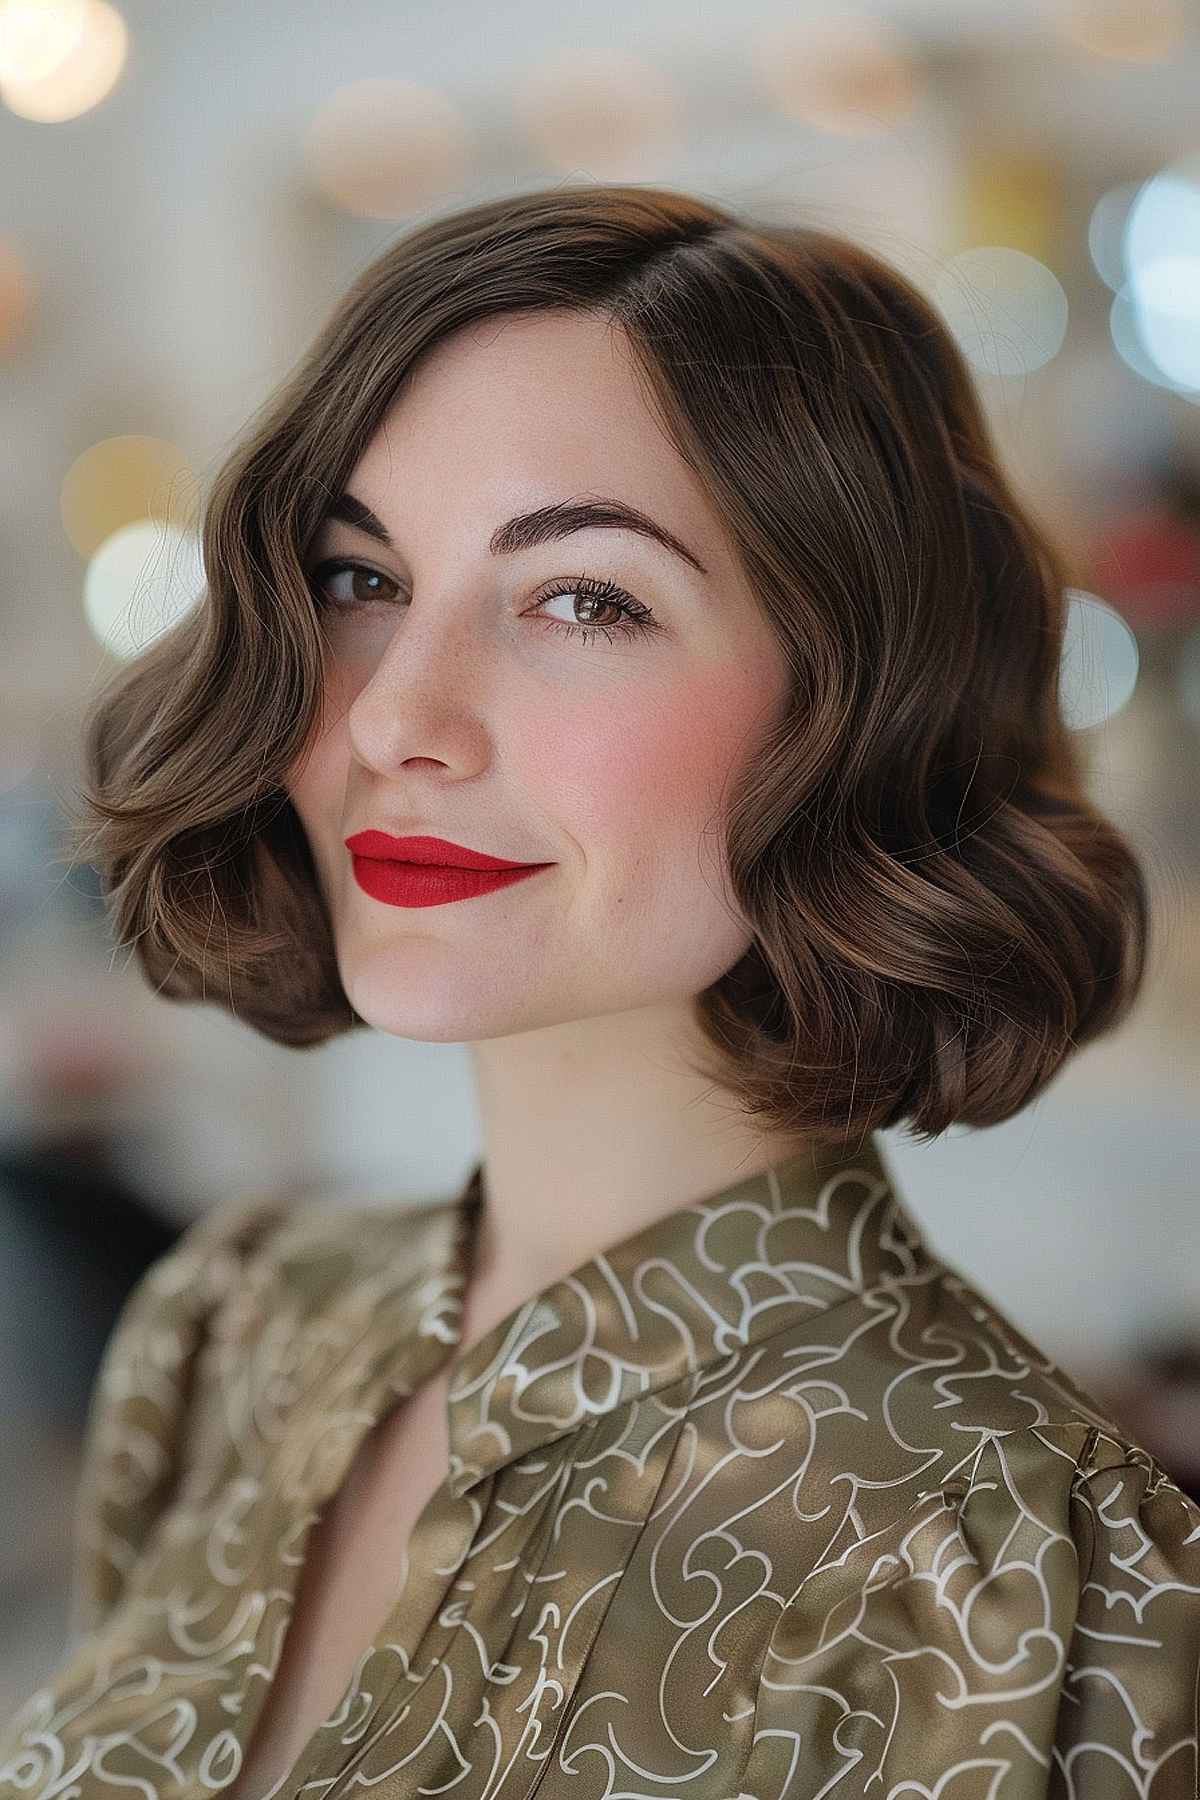 Chin-length Chanel bob with retro-styled waves for a classic look.